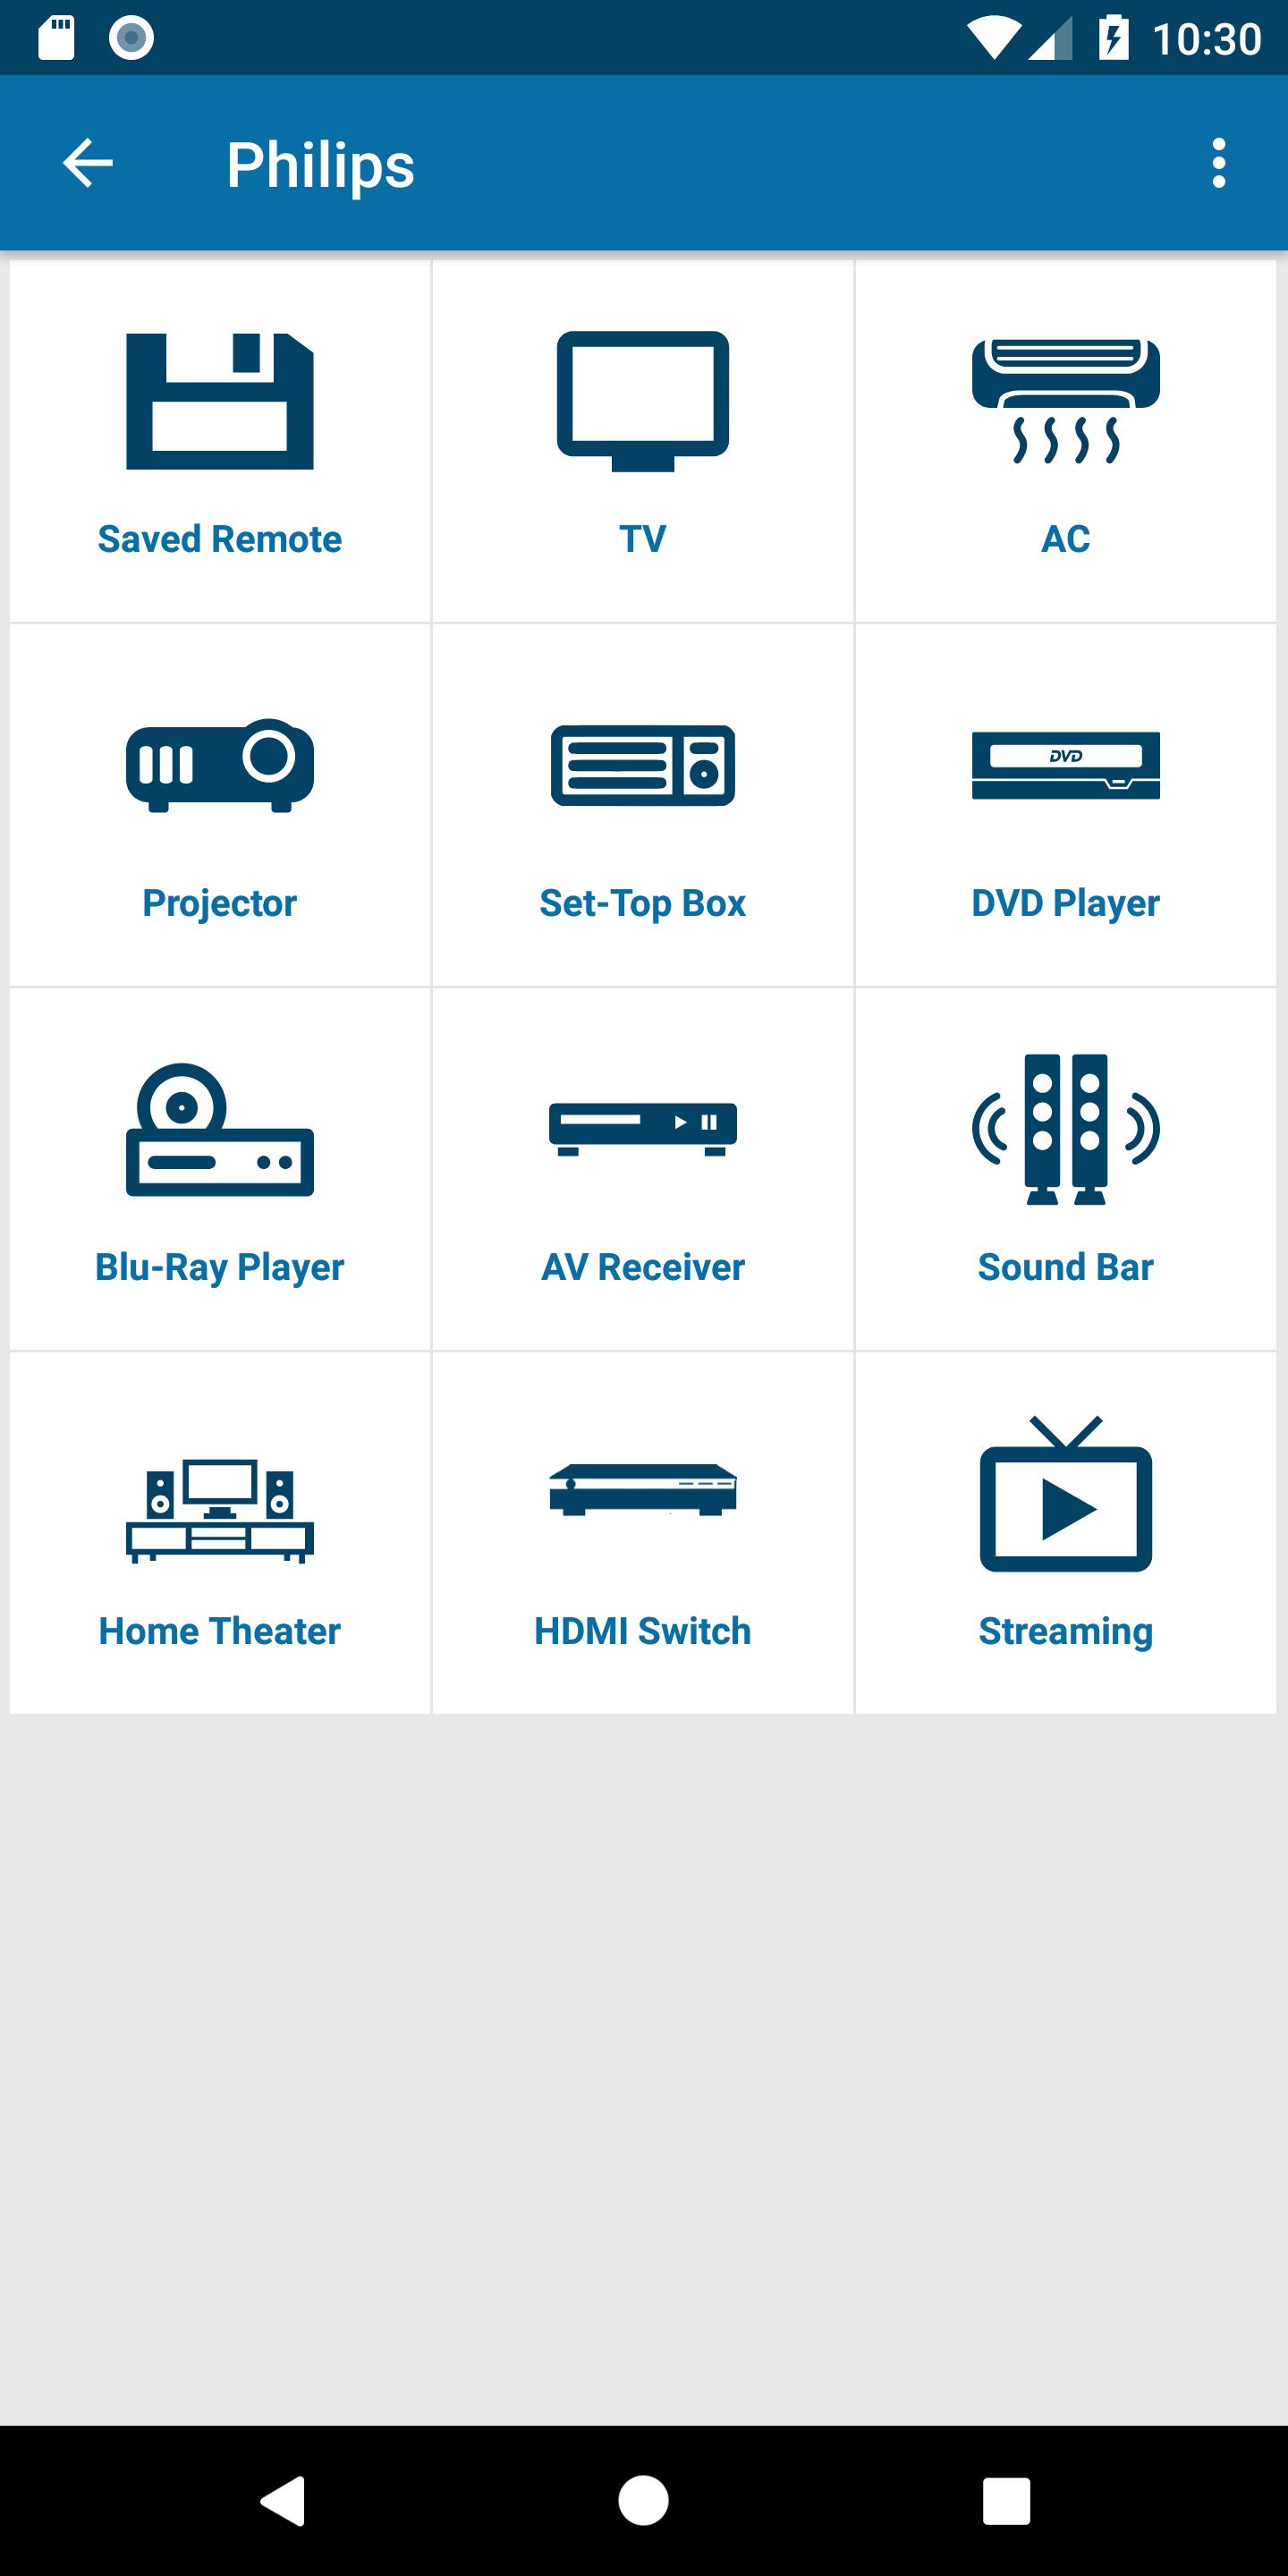 Philips Soundbar Remote for Android - APK Download